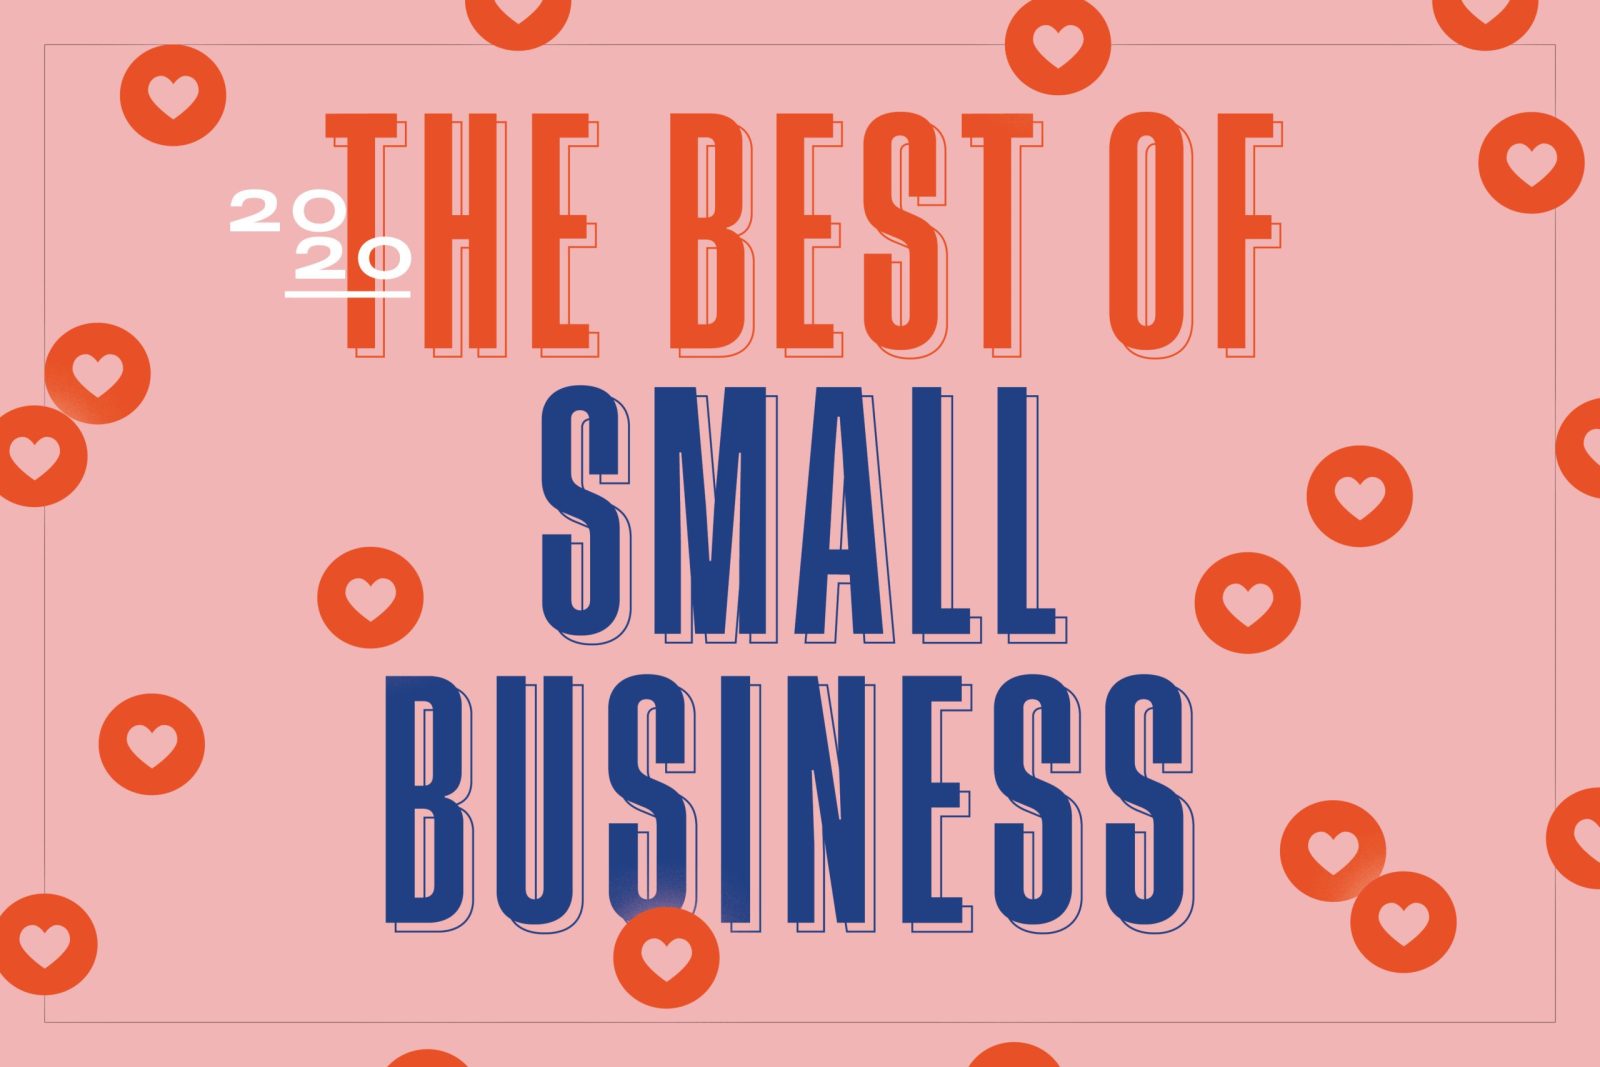 Hawaii Business Magazine - The Best of Small Business 2020